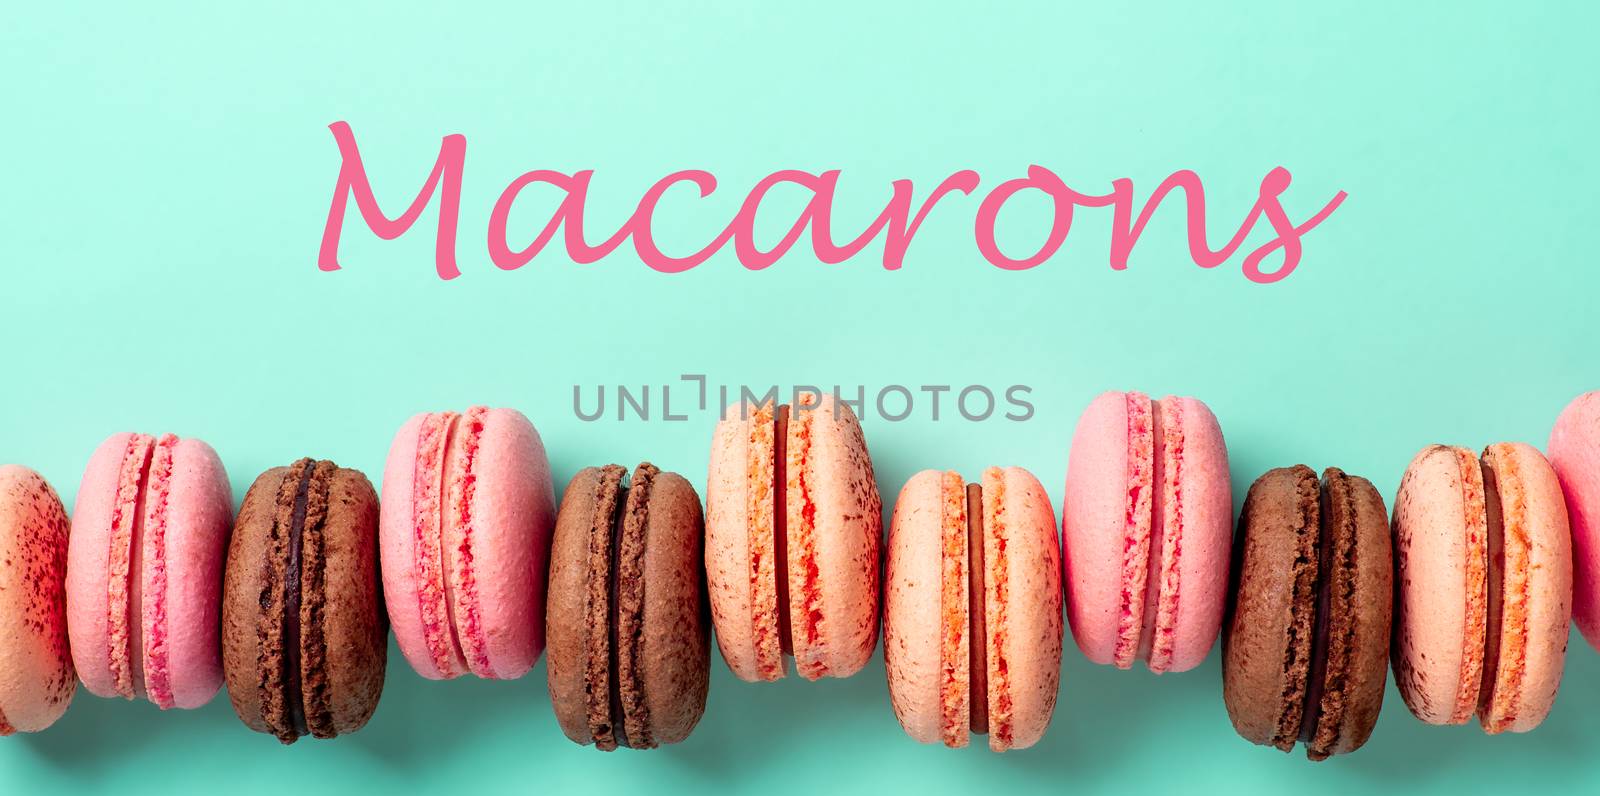 Macarons concept. Letters macarons on turquose bright bacground and row of french macarons